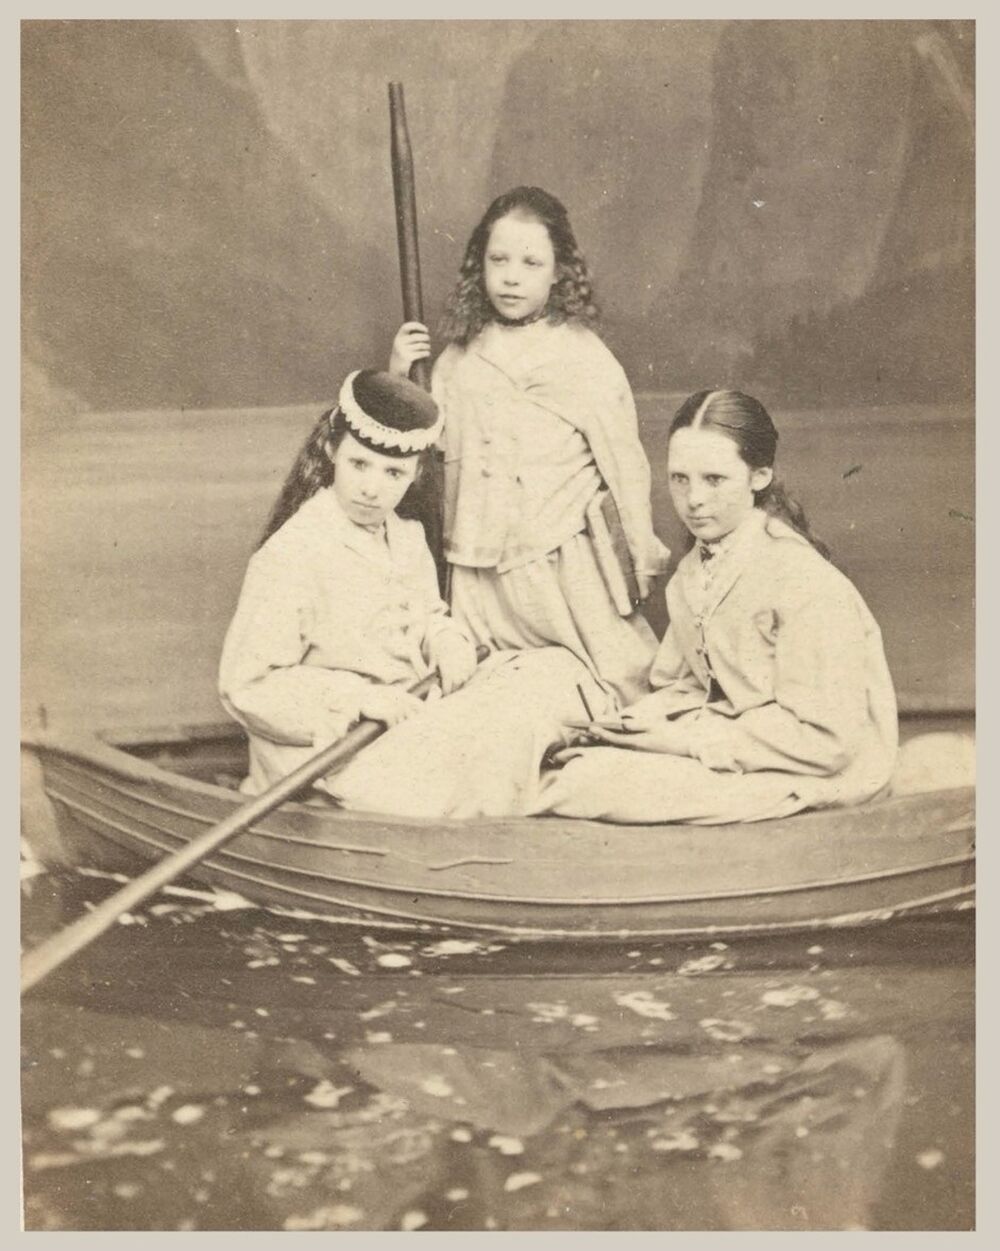 A sepia photograph of three children sat in a rowing boat. Each girl has dark hair and is wearing a white dress. One sits holding an oar, one sits in front of her, and the other stands behind them.